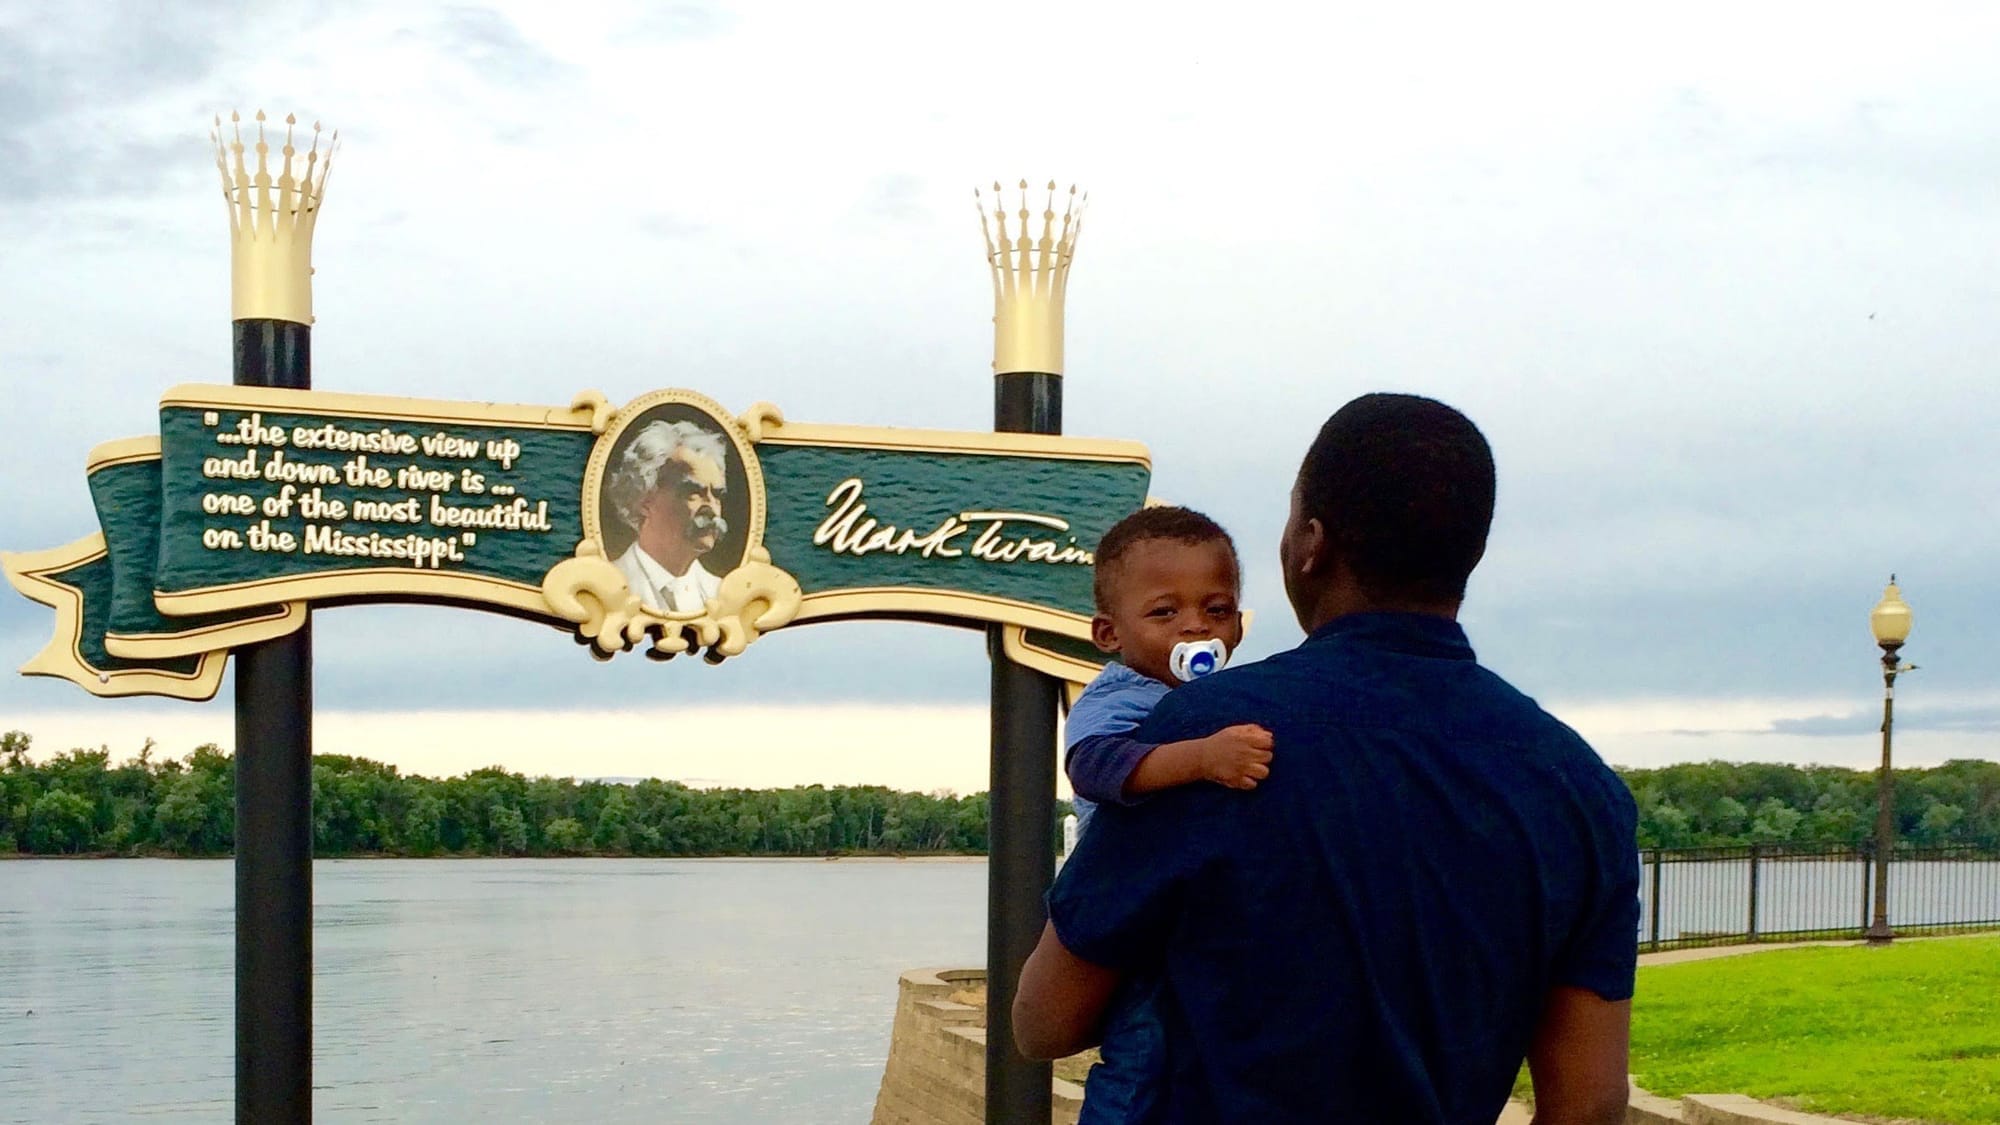 The author and his baby son in Hannibal, Missouri, standing before the Mississippi River, and a large, elaborate sign depicting Mark Twain, with the quote: "... the extensive view up and down the river is... one of the most beautiful on the Mississippi."